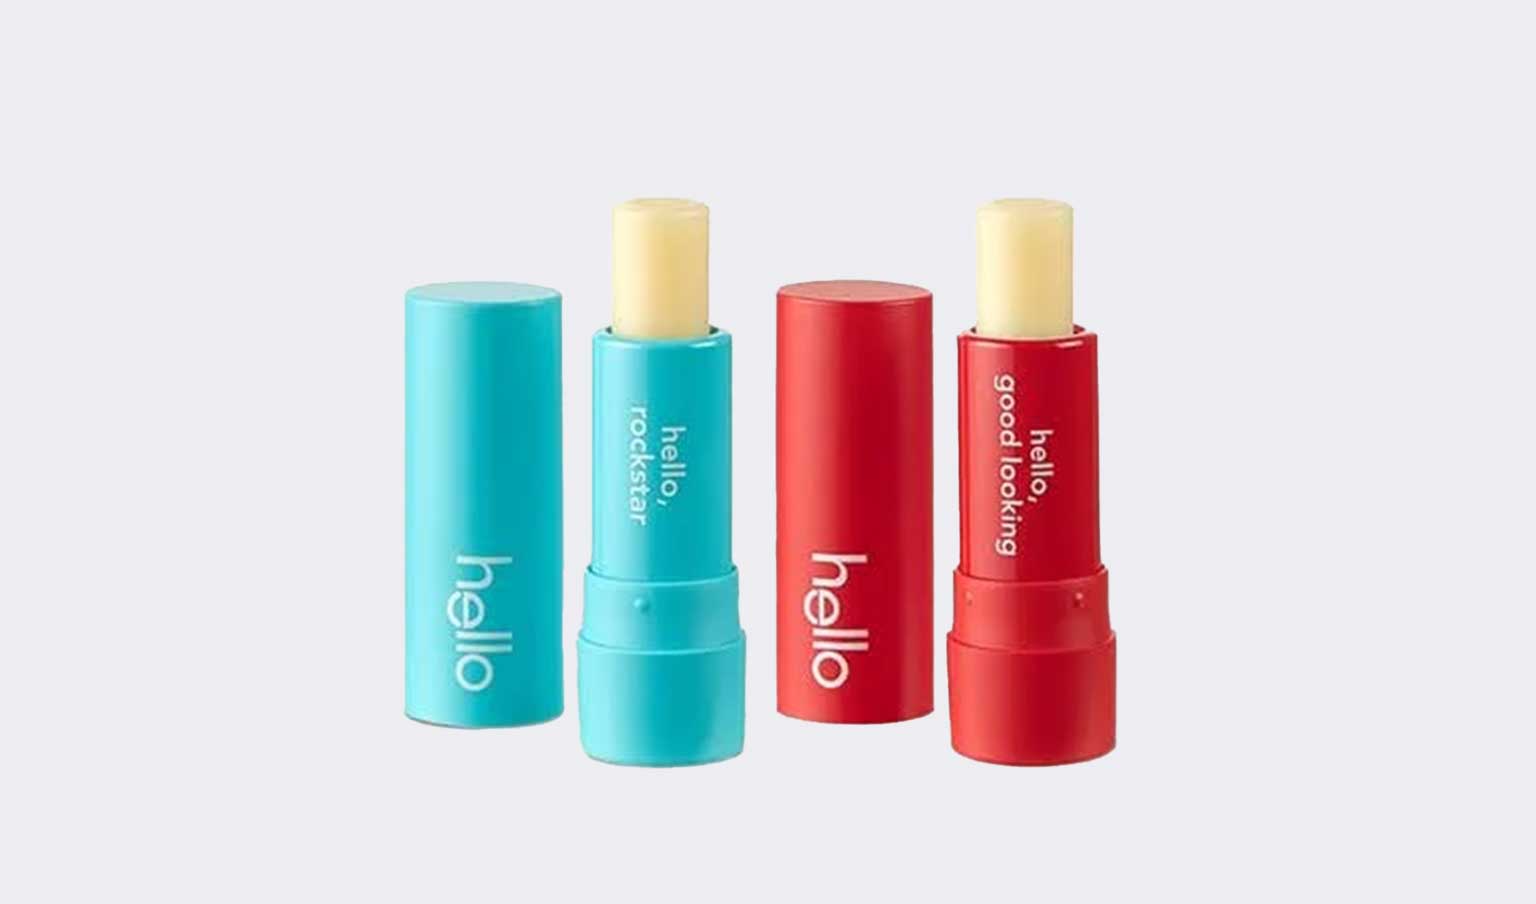 hello lip balm in red and light blue tubes on light background